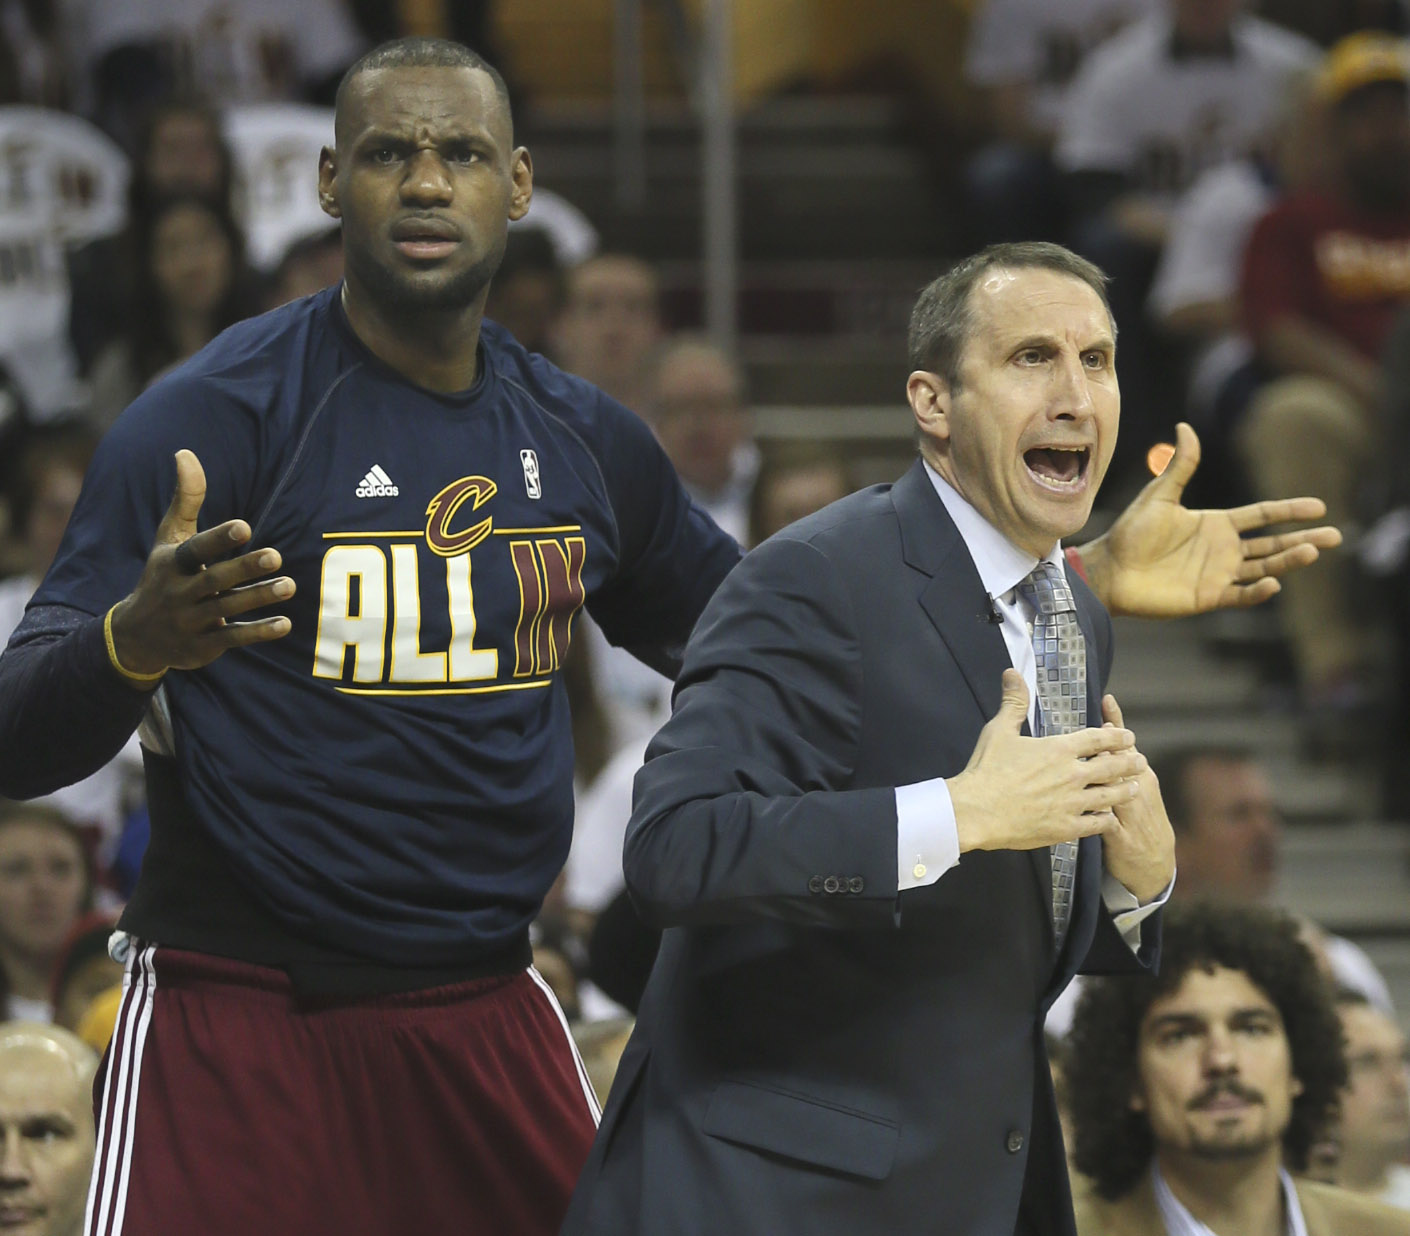 Cleveland Cavaliers' LeBron James and head coach David Blatt question an official's call during the first quarter on Sunday, April 19, 2015, at Quicken Loans Arena in Cleveland, Ohio. Credit: Courtesy of TNS 